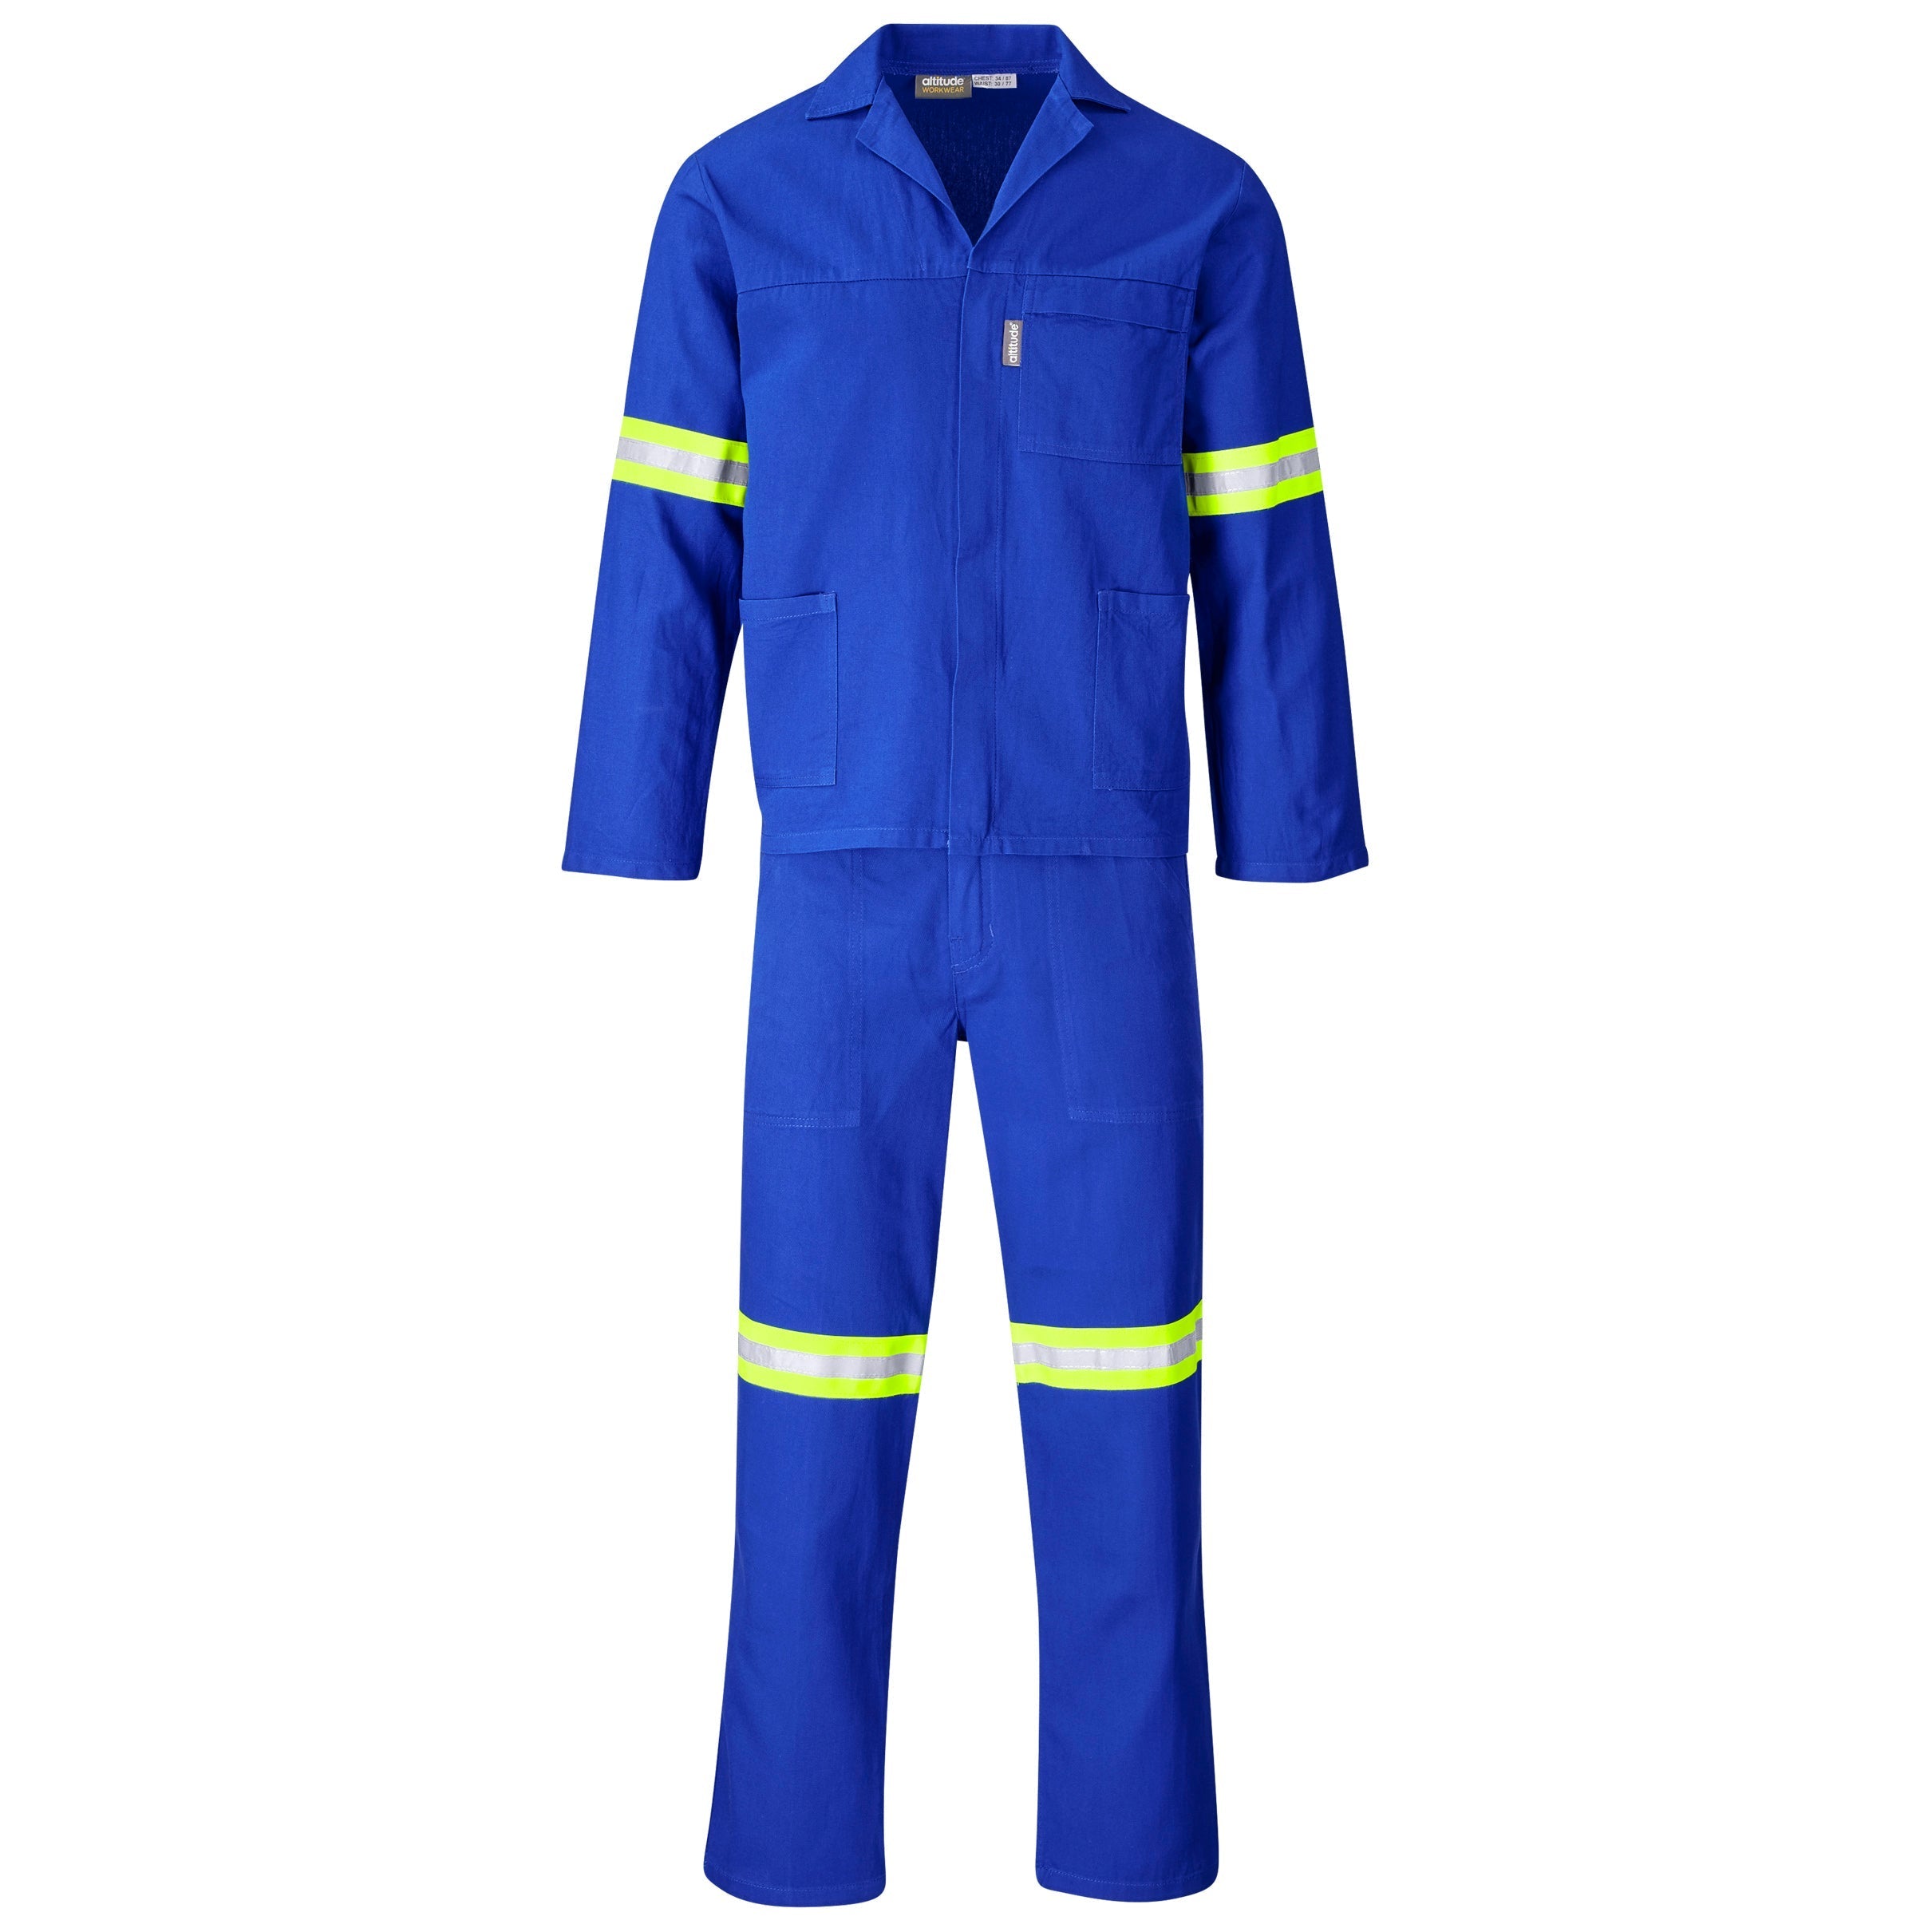 Technician 100% Cotton Conti Suit - Reflective Arms & Legs - Yellow Tape-32-Royal Blue-RB